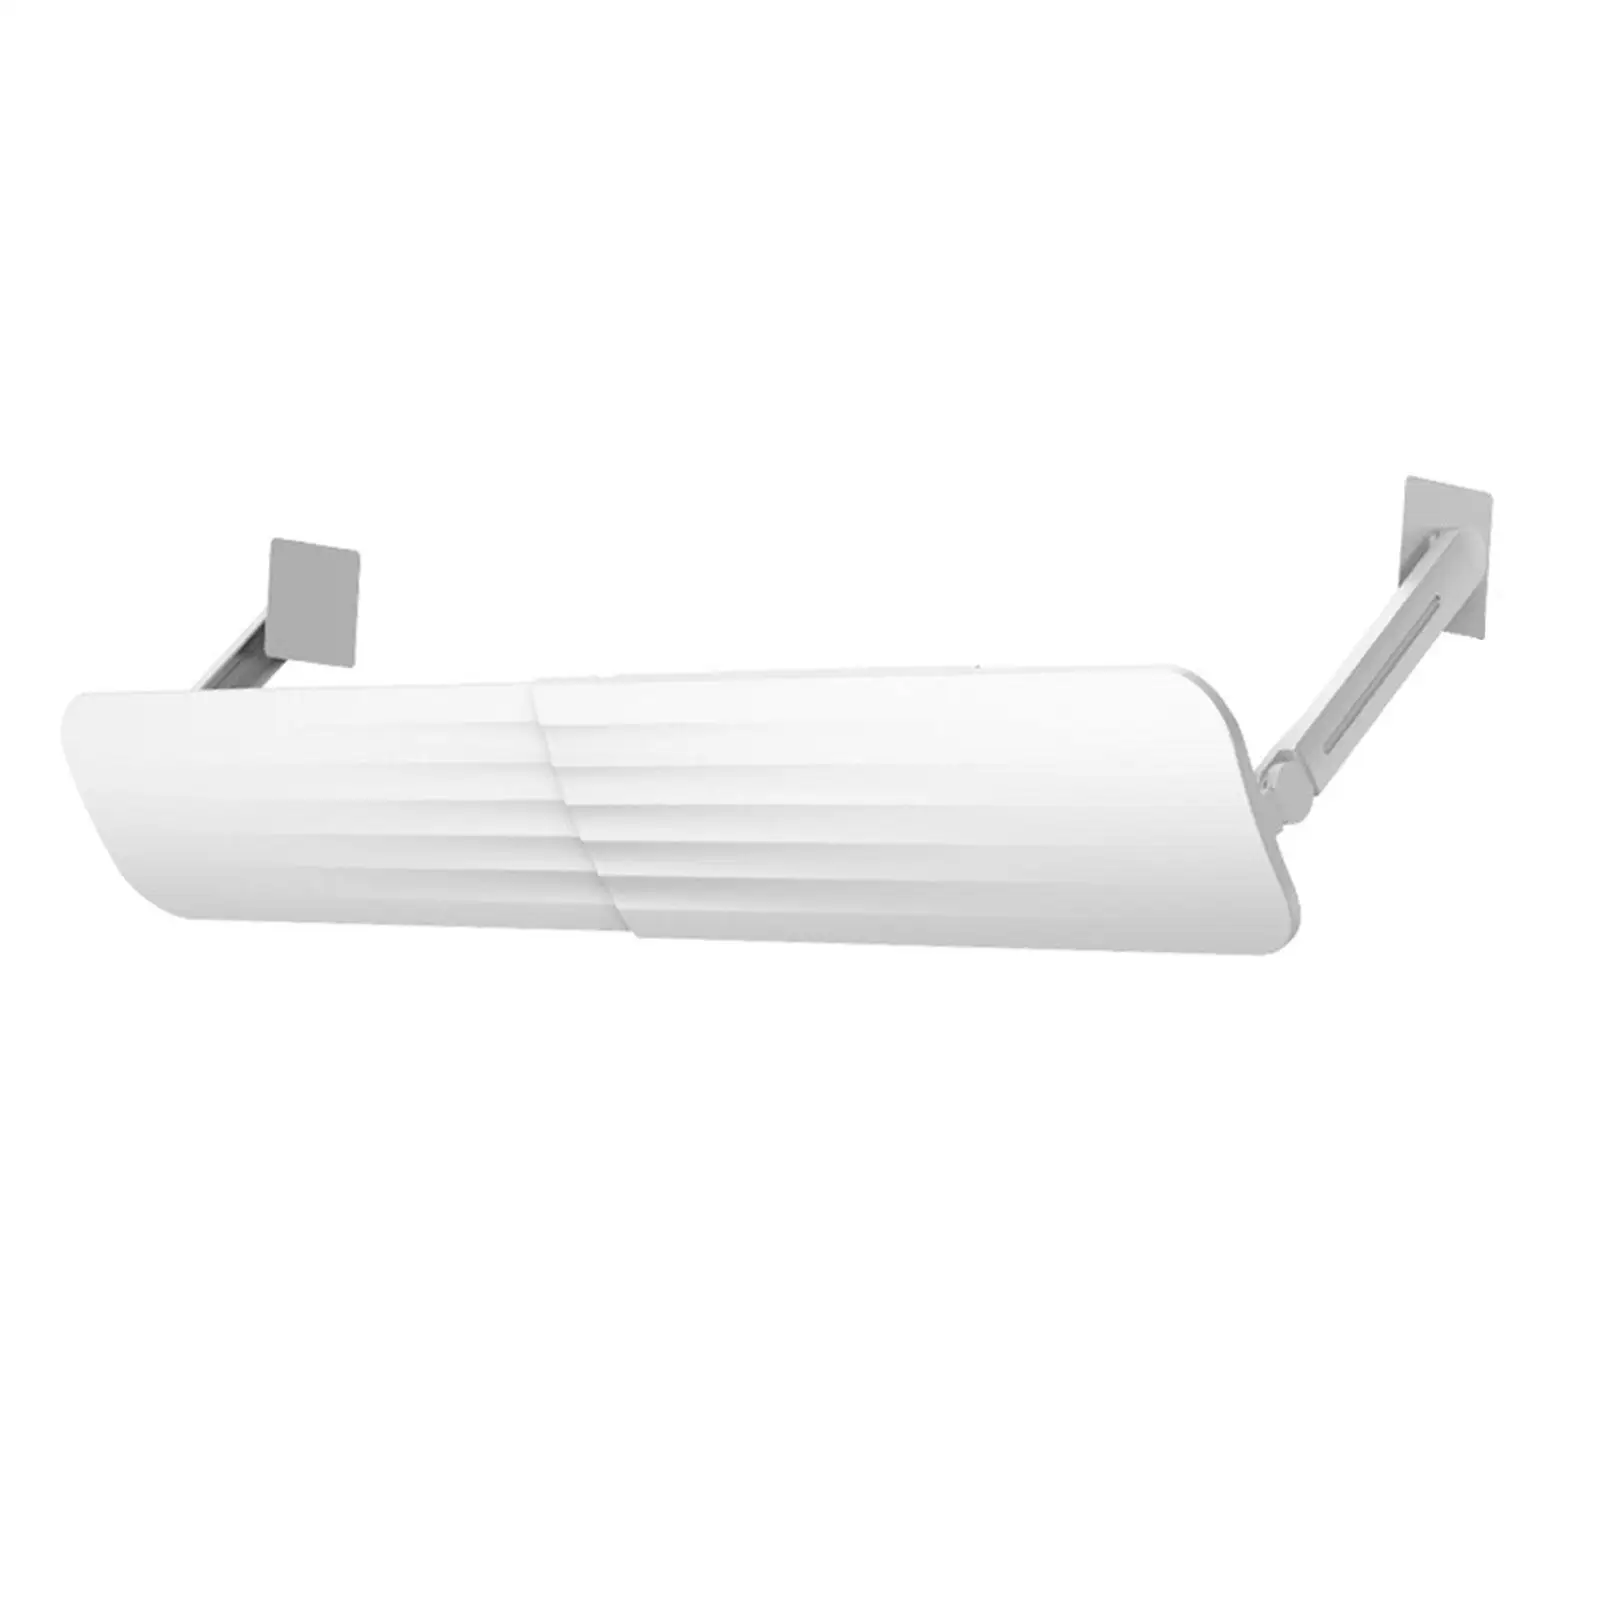 Air Conditioner Deflector Adjustable Telescopic Cooled Baffle Durable for Living Room Offices Home Hanging Air Conditioner